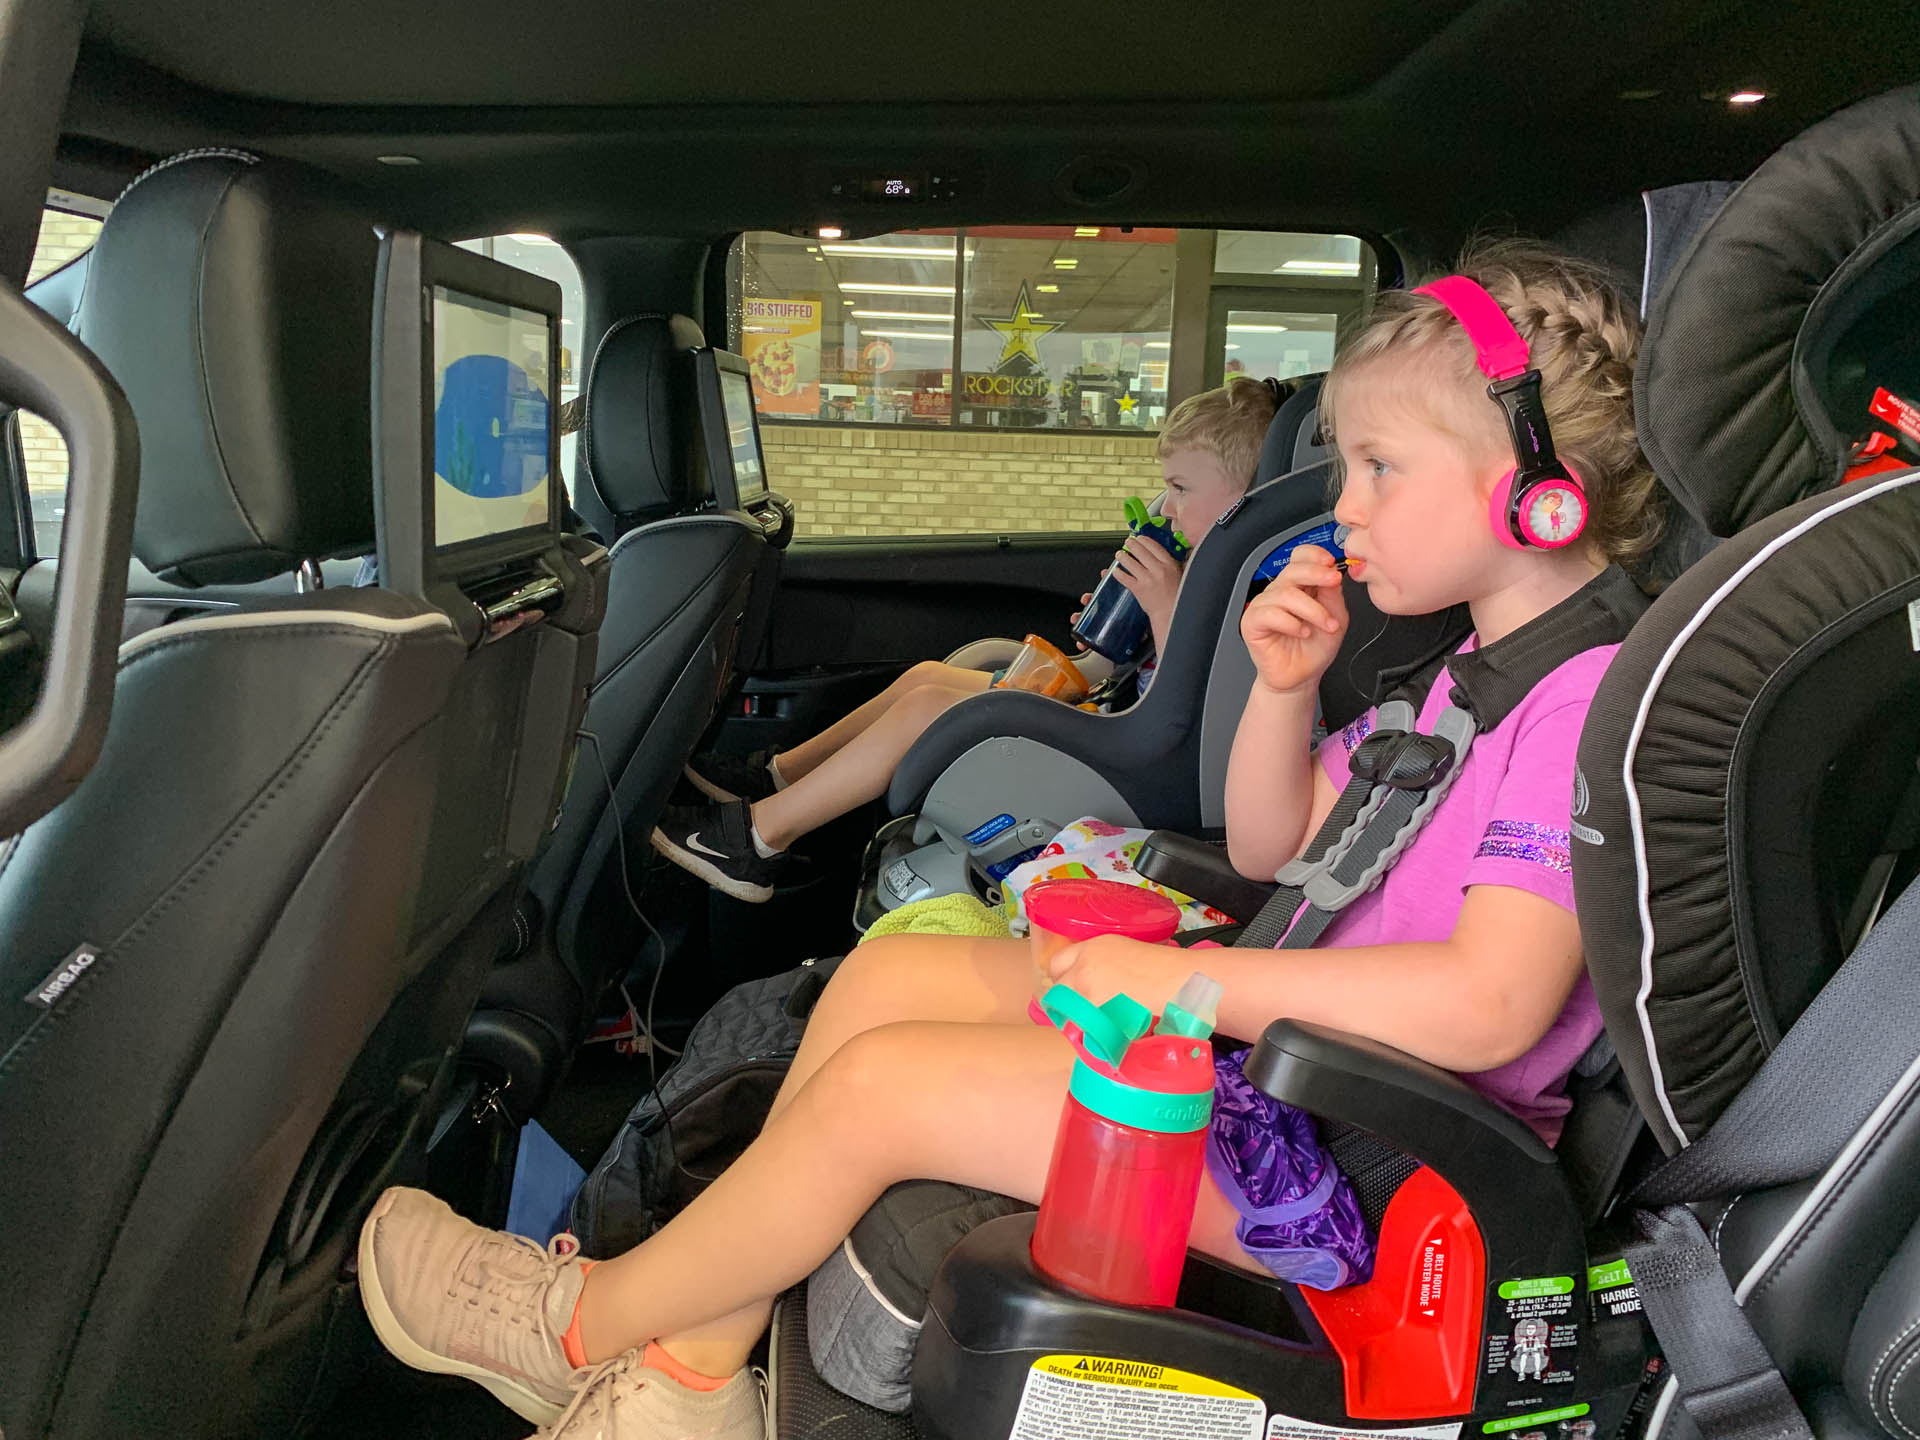 Yes Car Seats Expire And Here S Why, Does Car Seat Expiration Matter